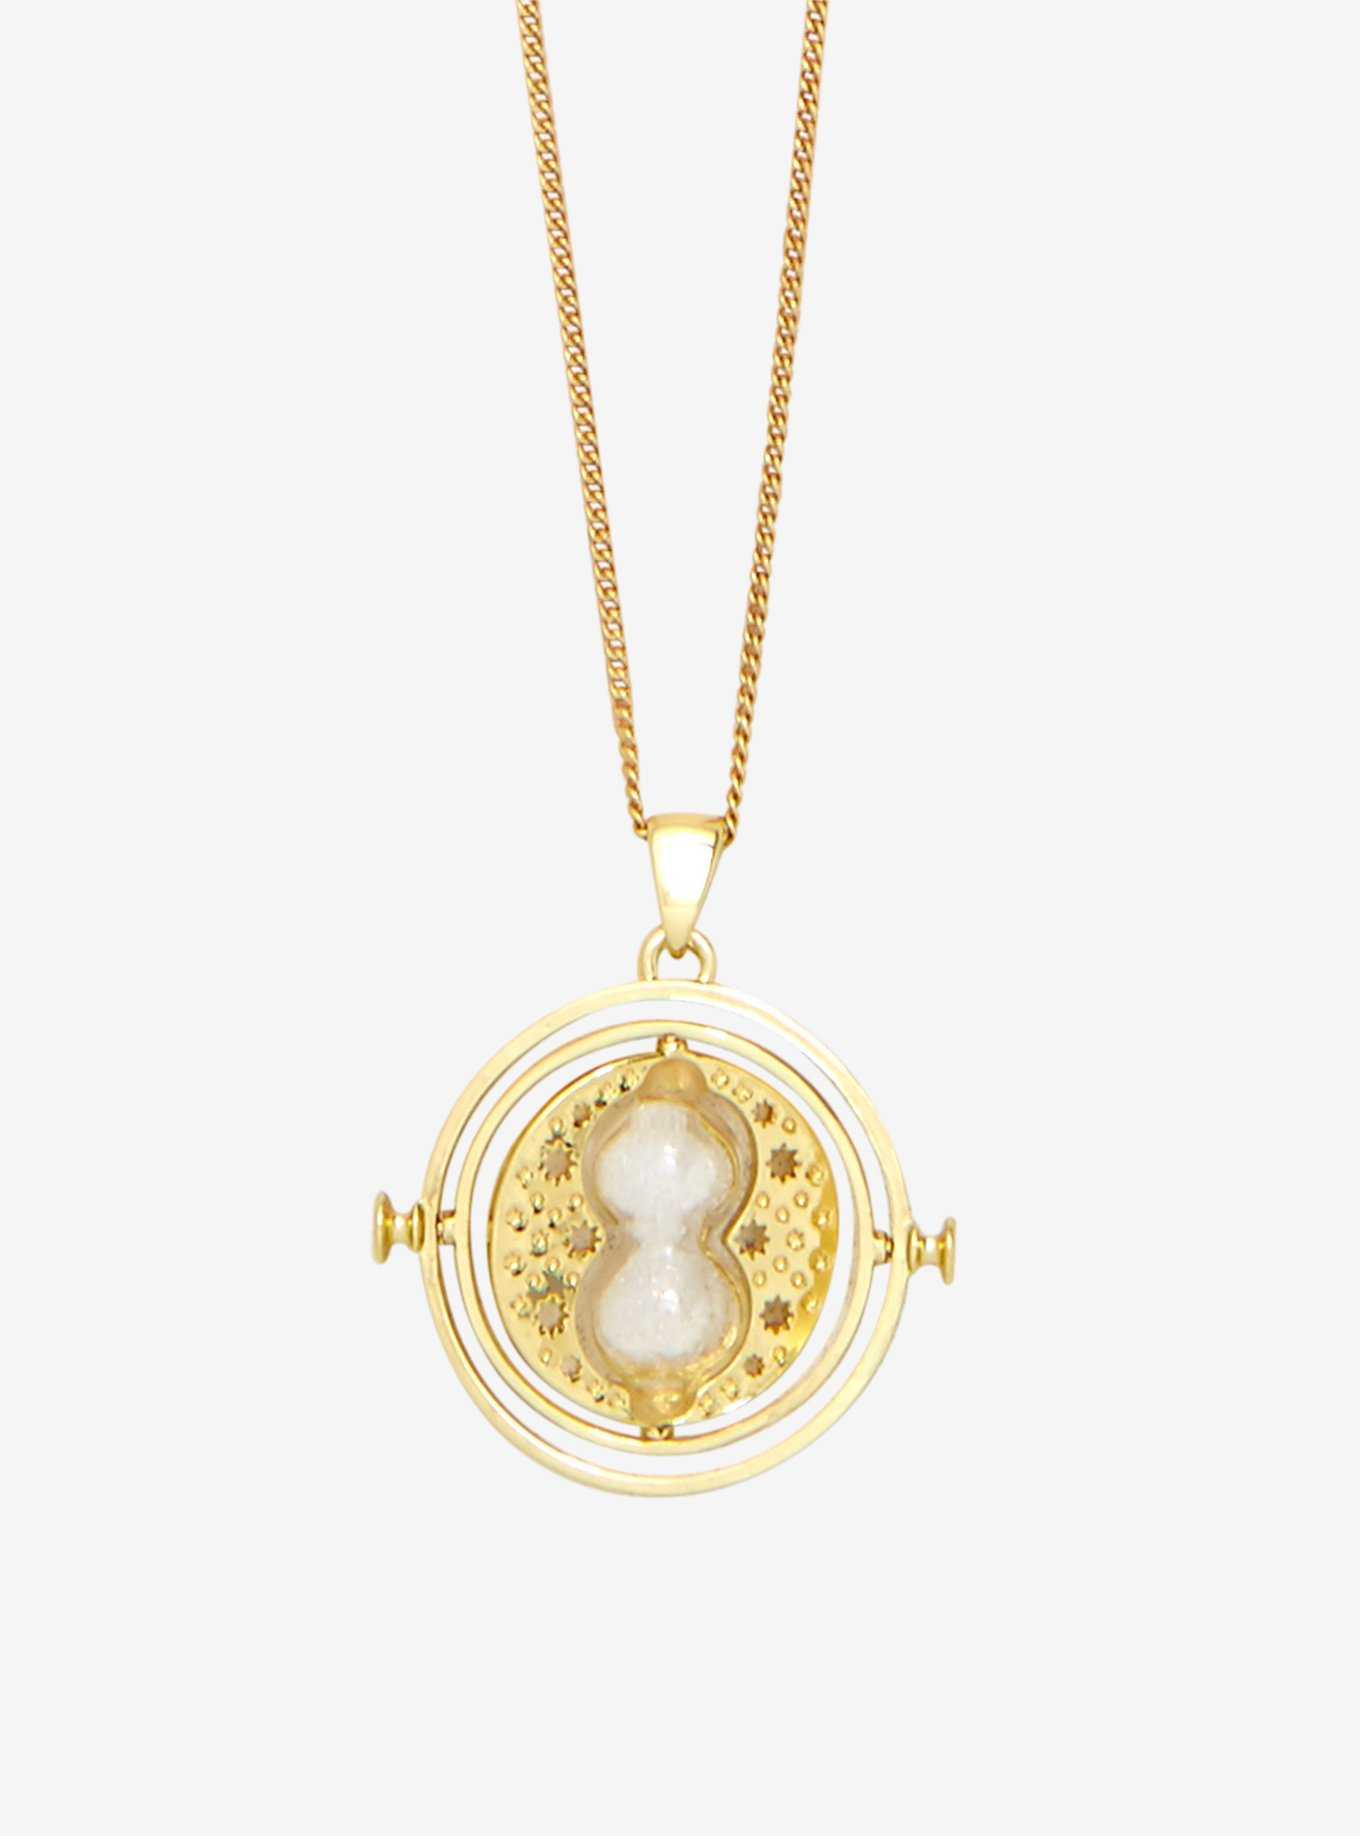 Official Harry Potter Time Turner Replica Necklace